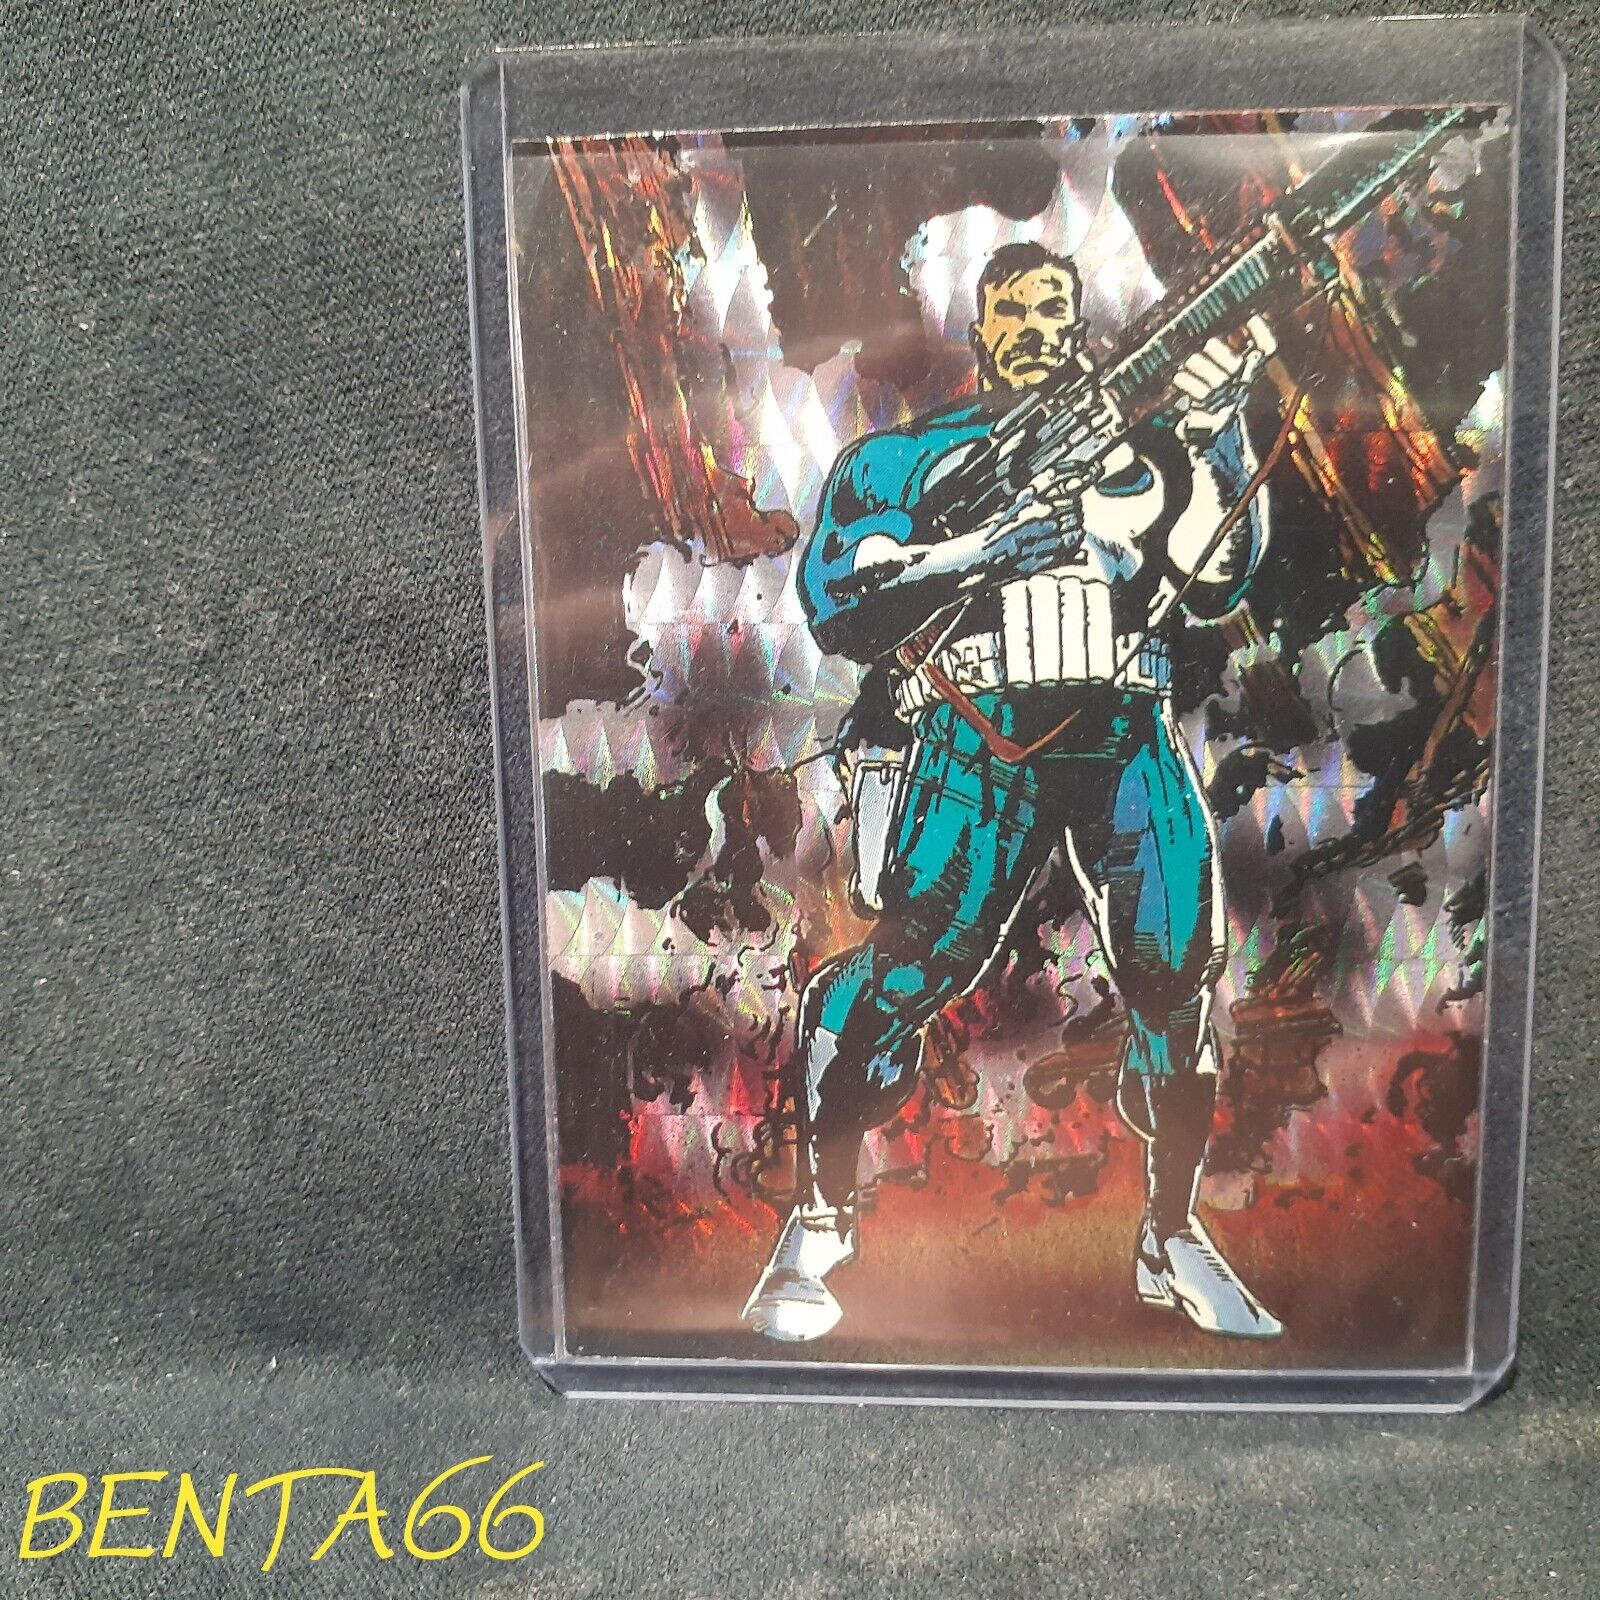 1992 Comic Images The Punisher Guts And Gunpowder 🔥 Punisher Prism Promo Card